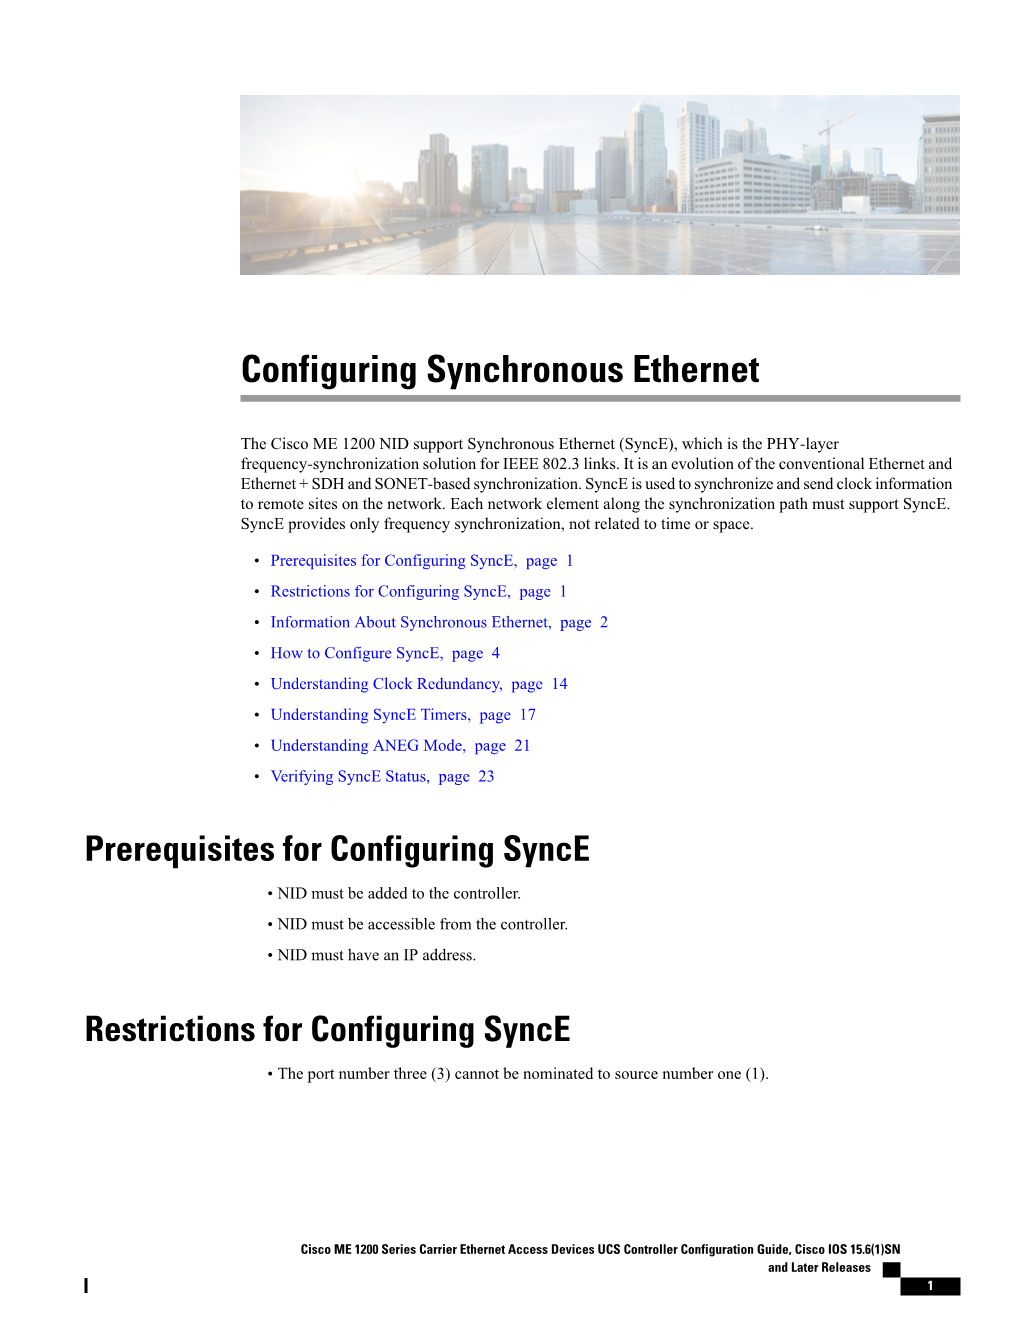 Configuring Synchronous Ethernet